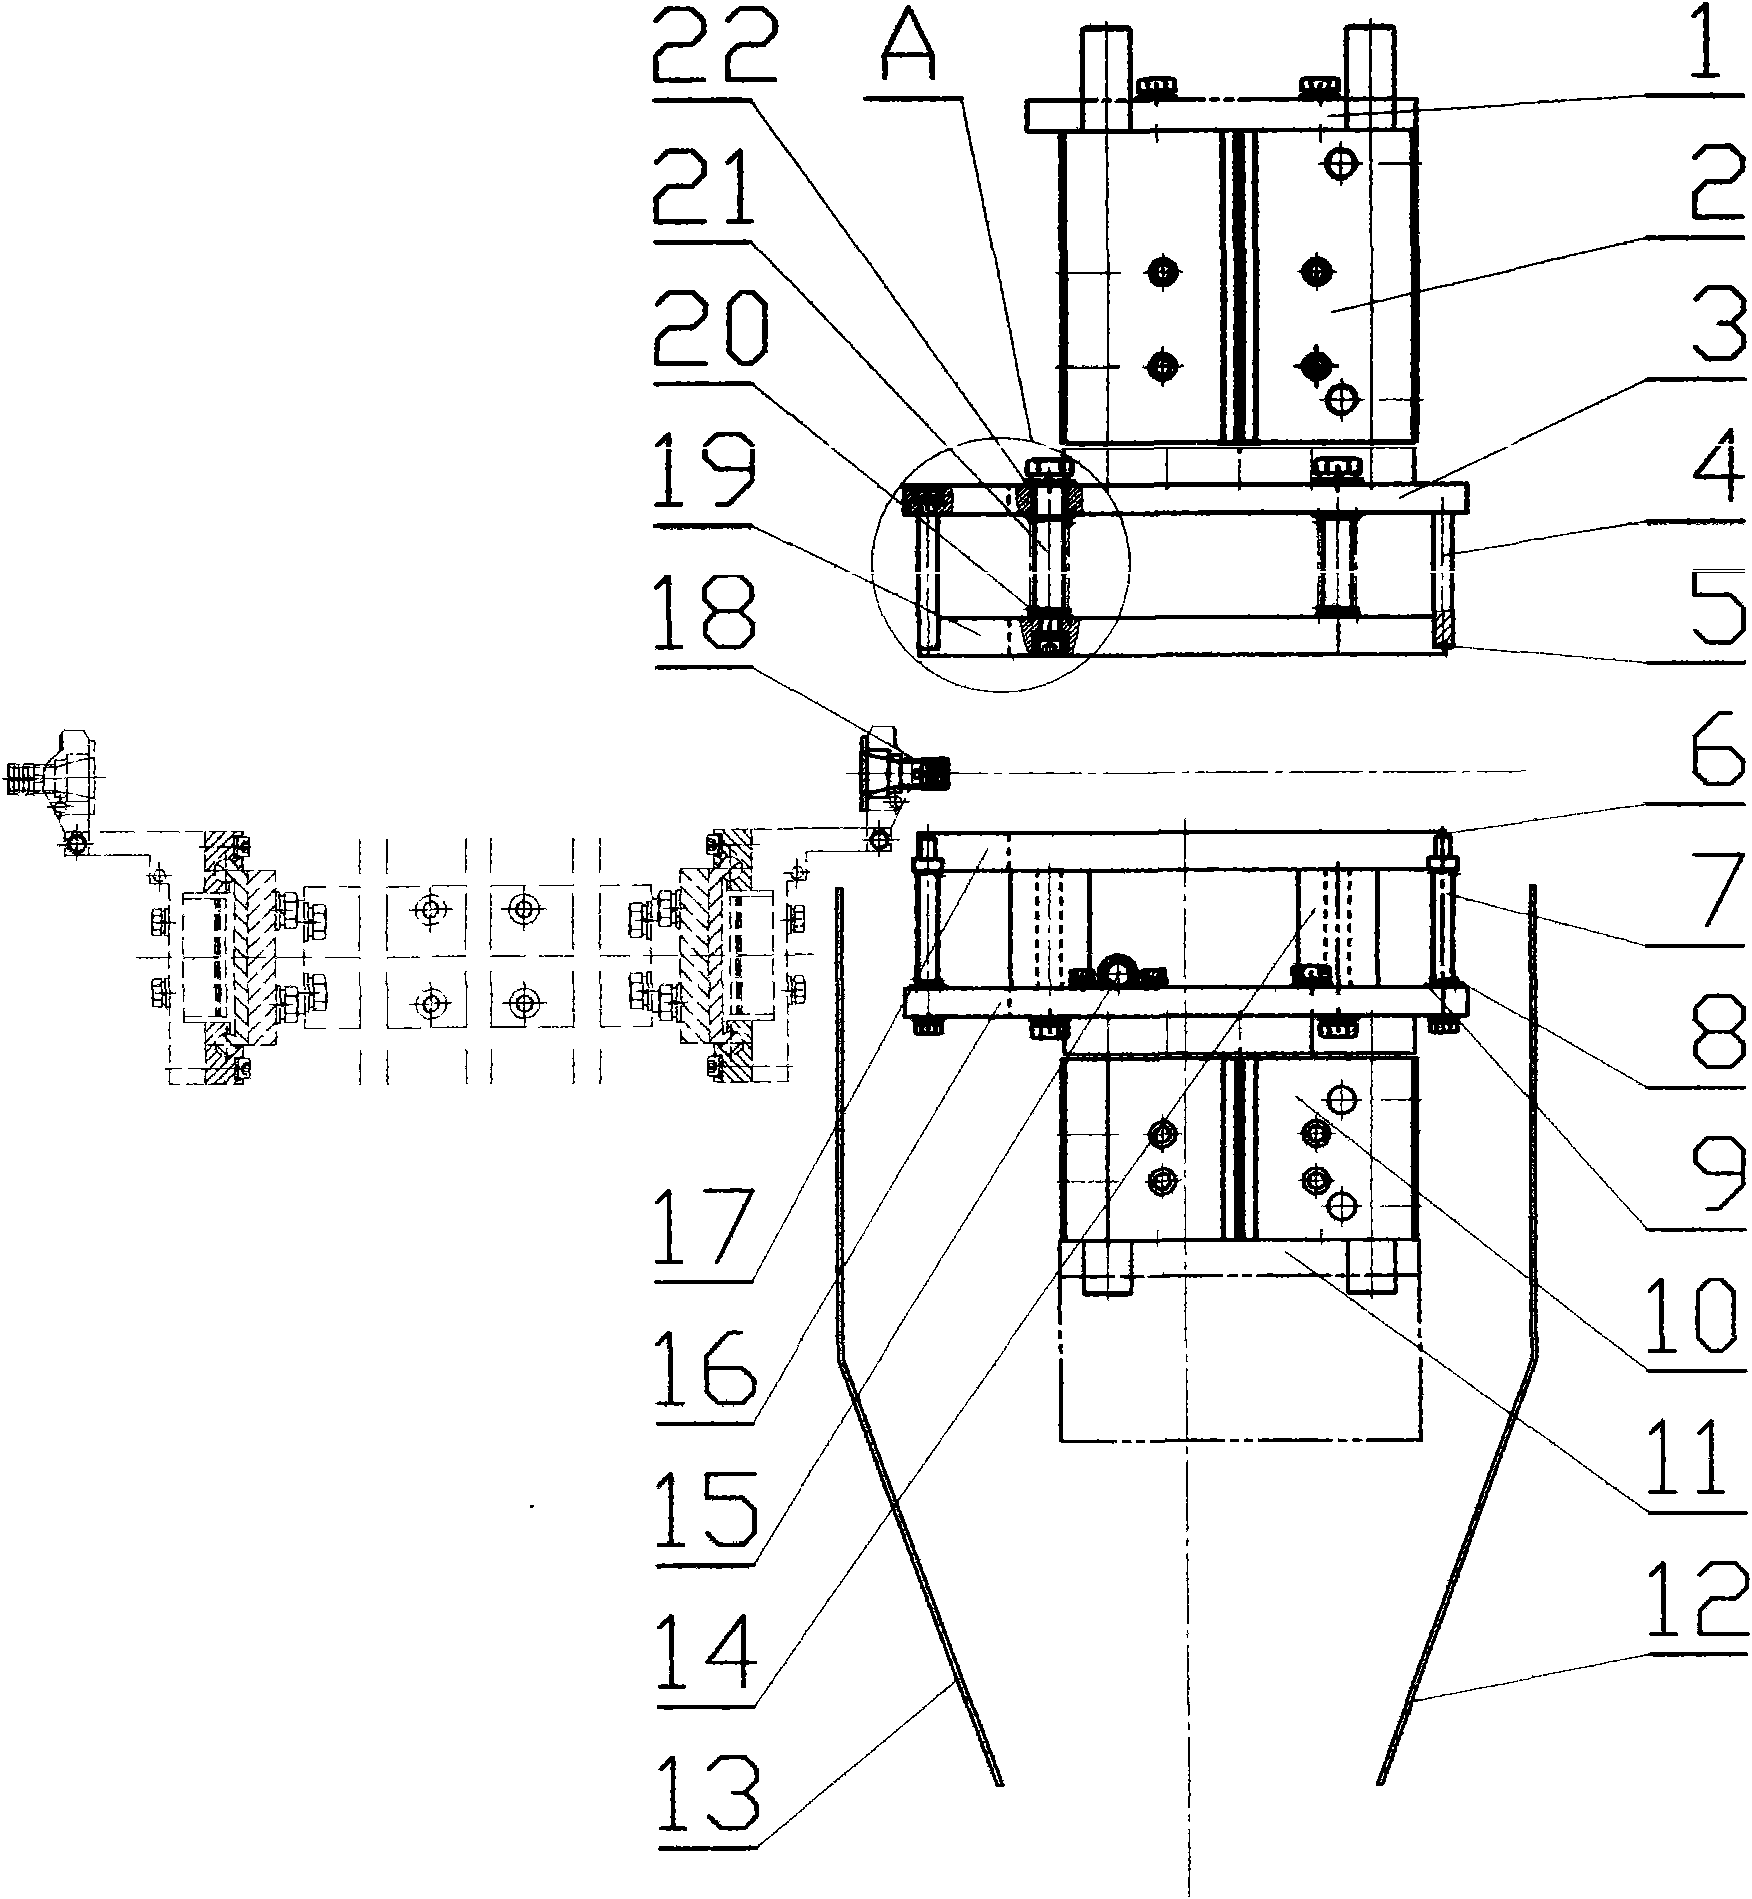 Waste-removing device applied in the process of producing large transfusion soft bag